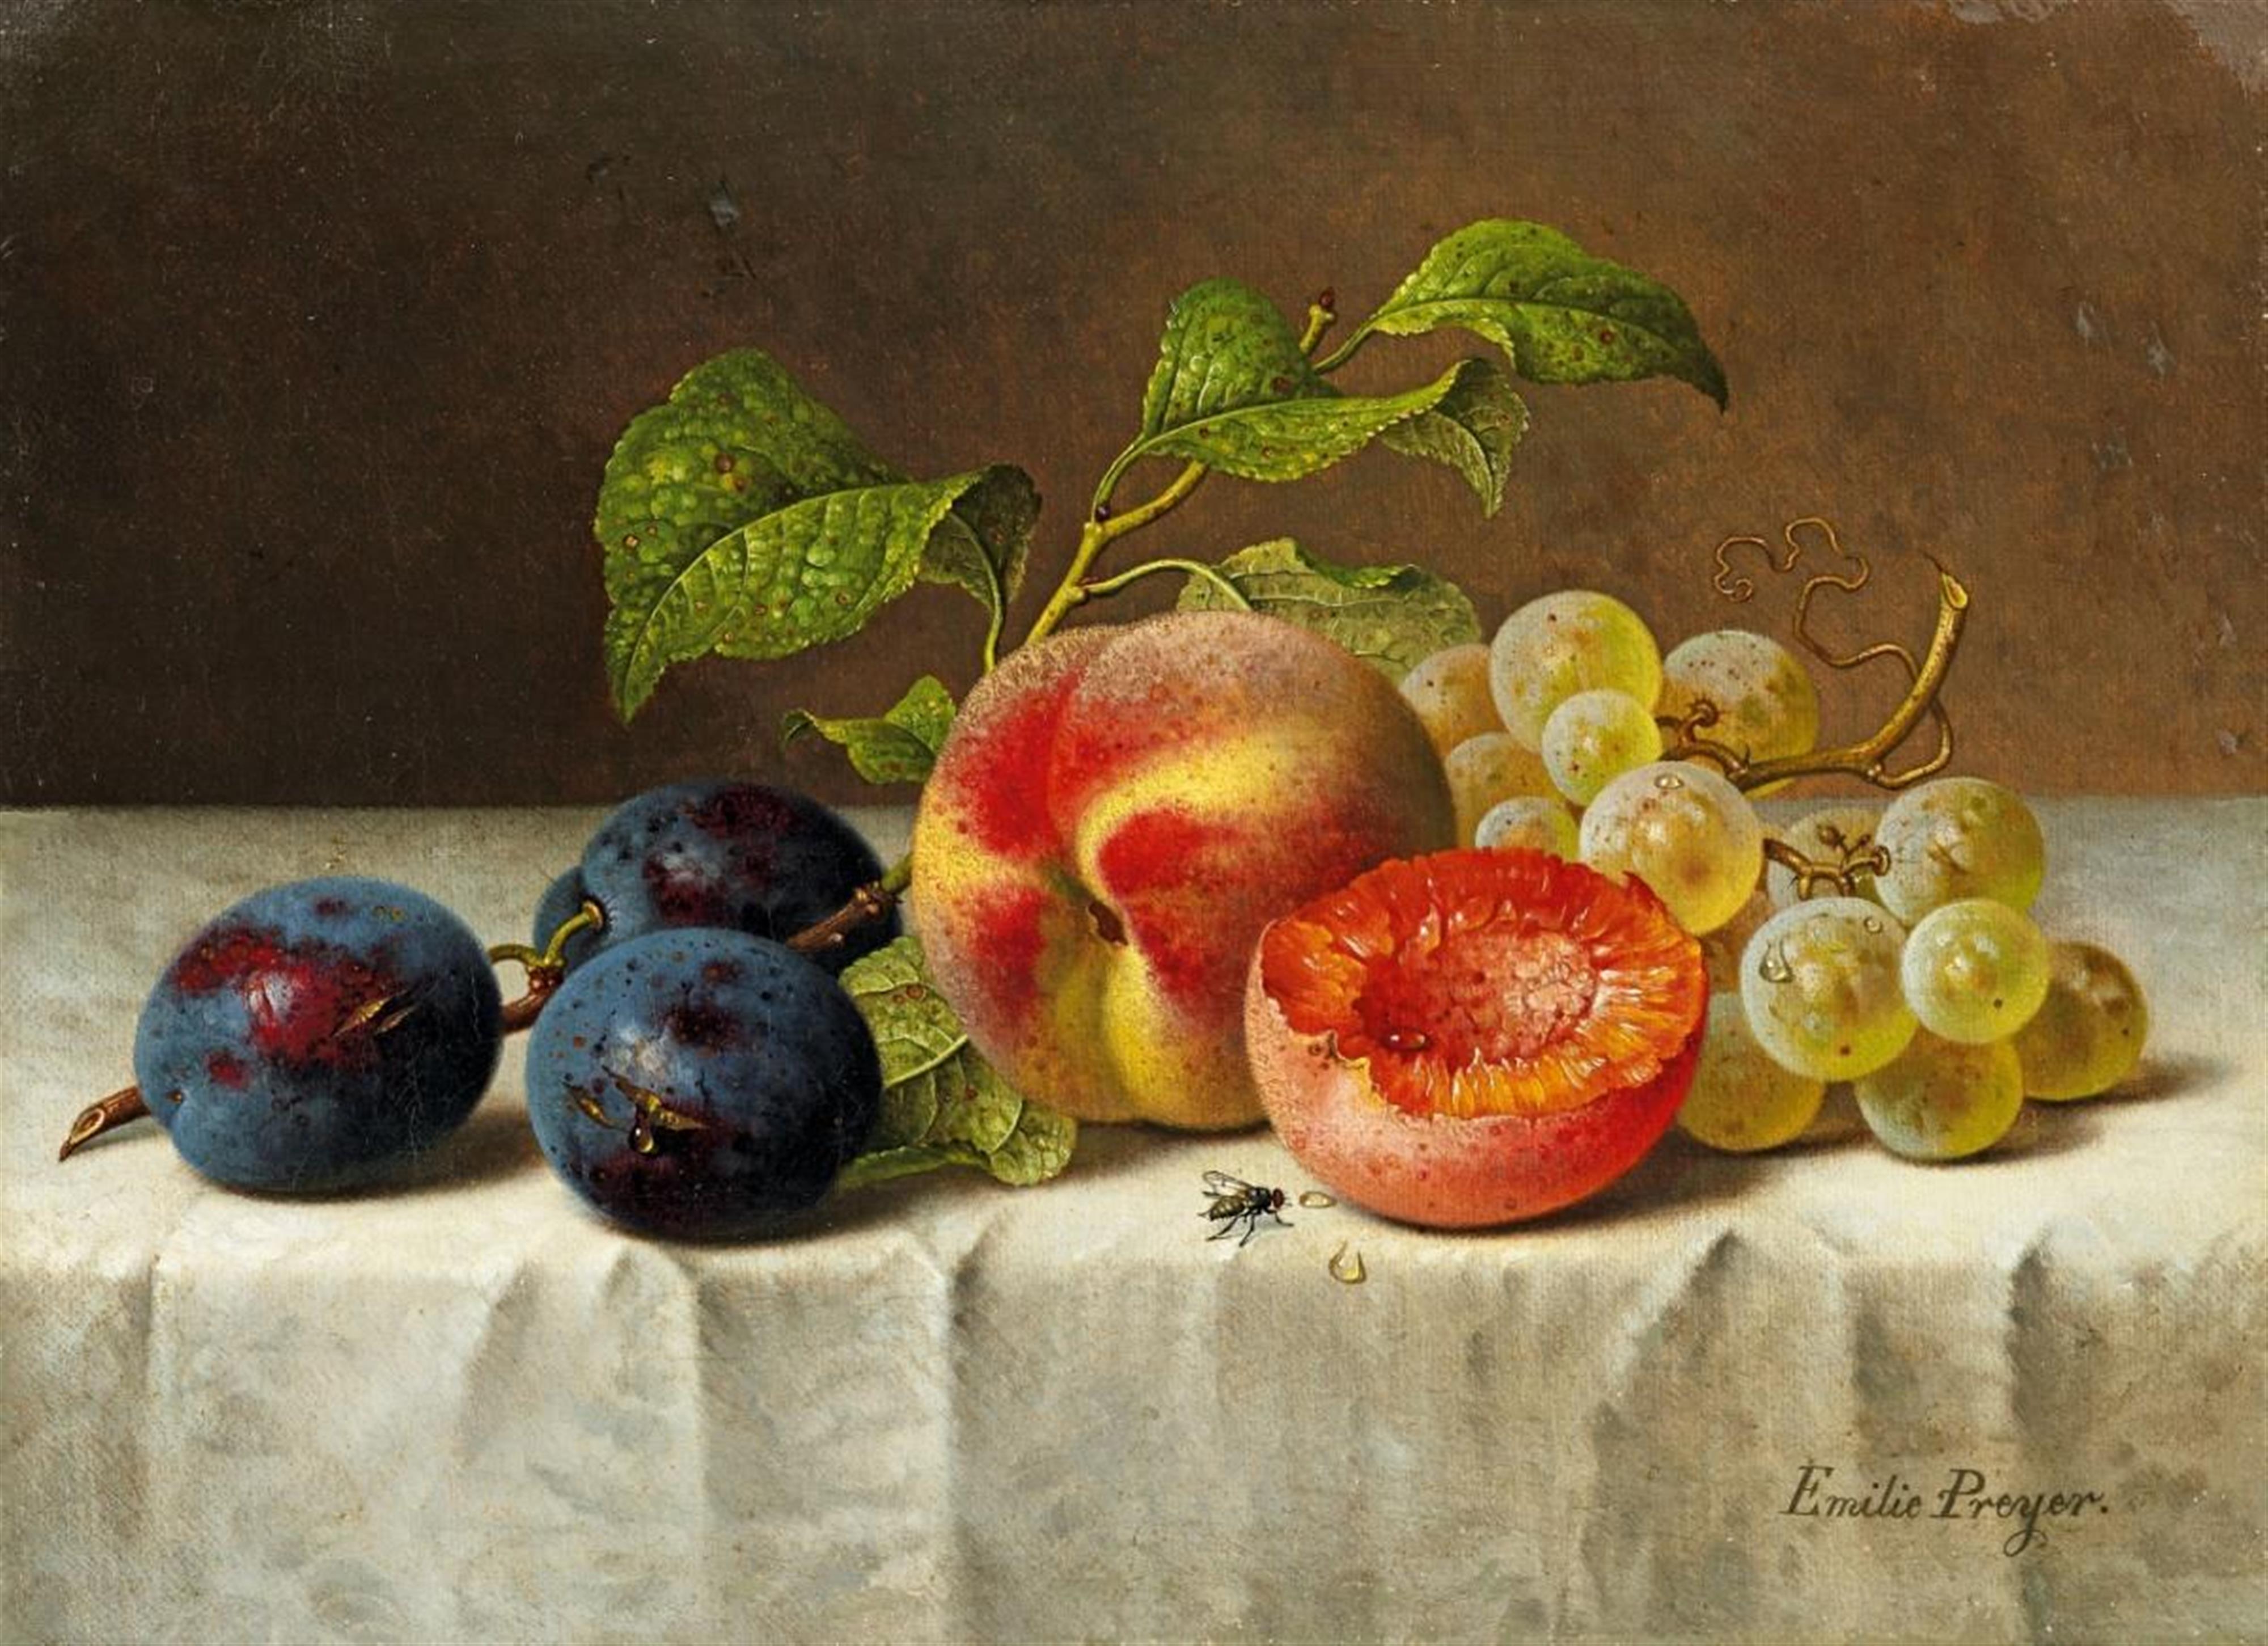 Emilie Preyer - STILL LIFE WITH PEACHES, GRAPES, PRUNES AND GRAPES - image-1